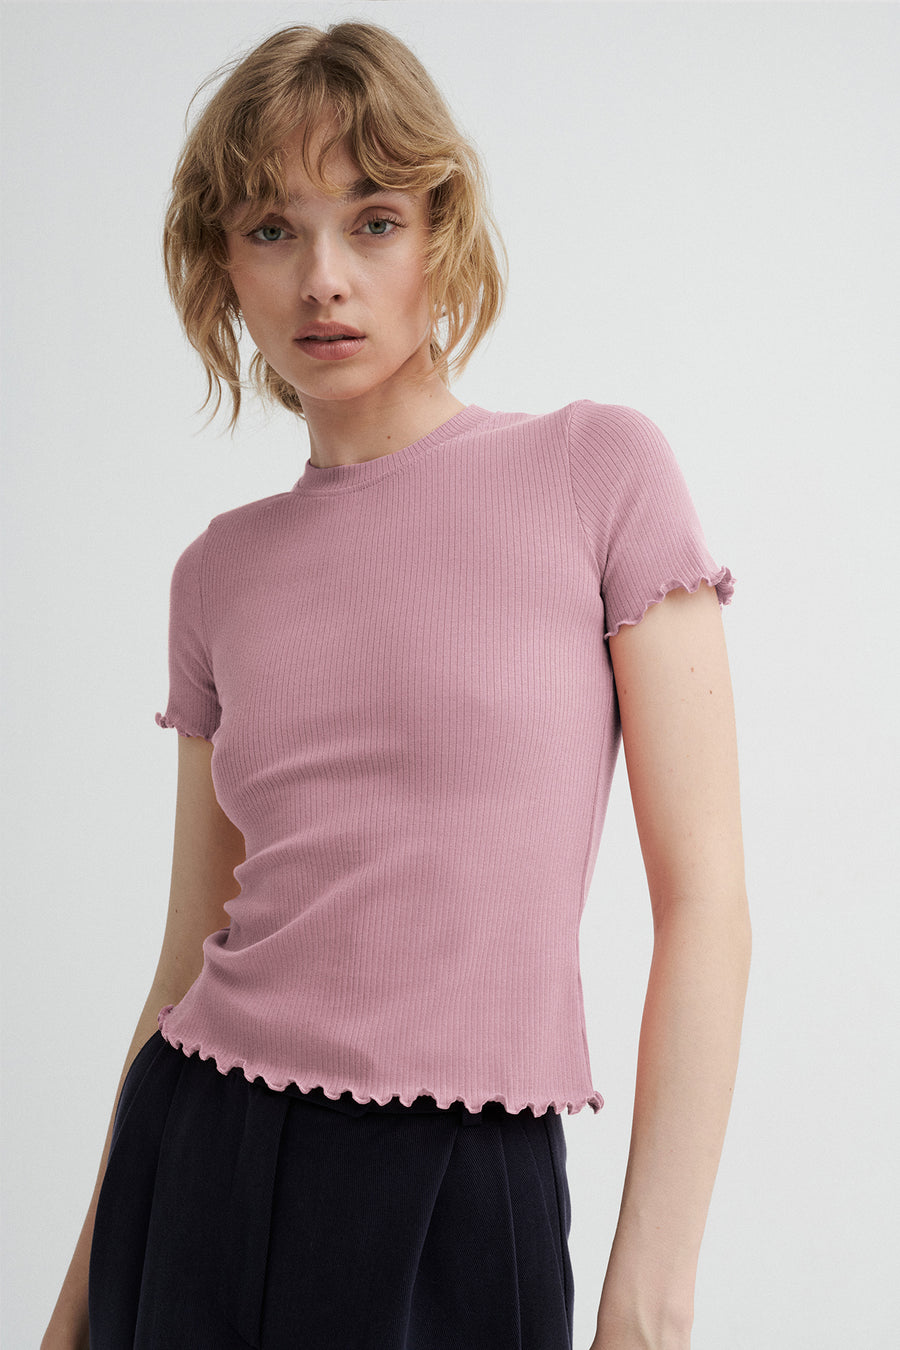 T-shirt in organic cotton / 13 / 25 / dusty pink